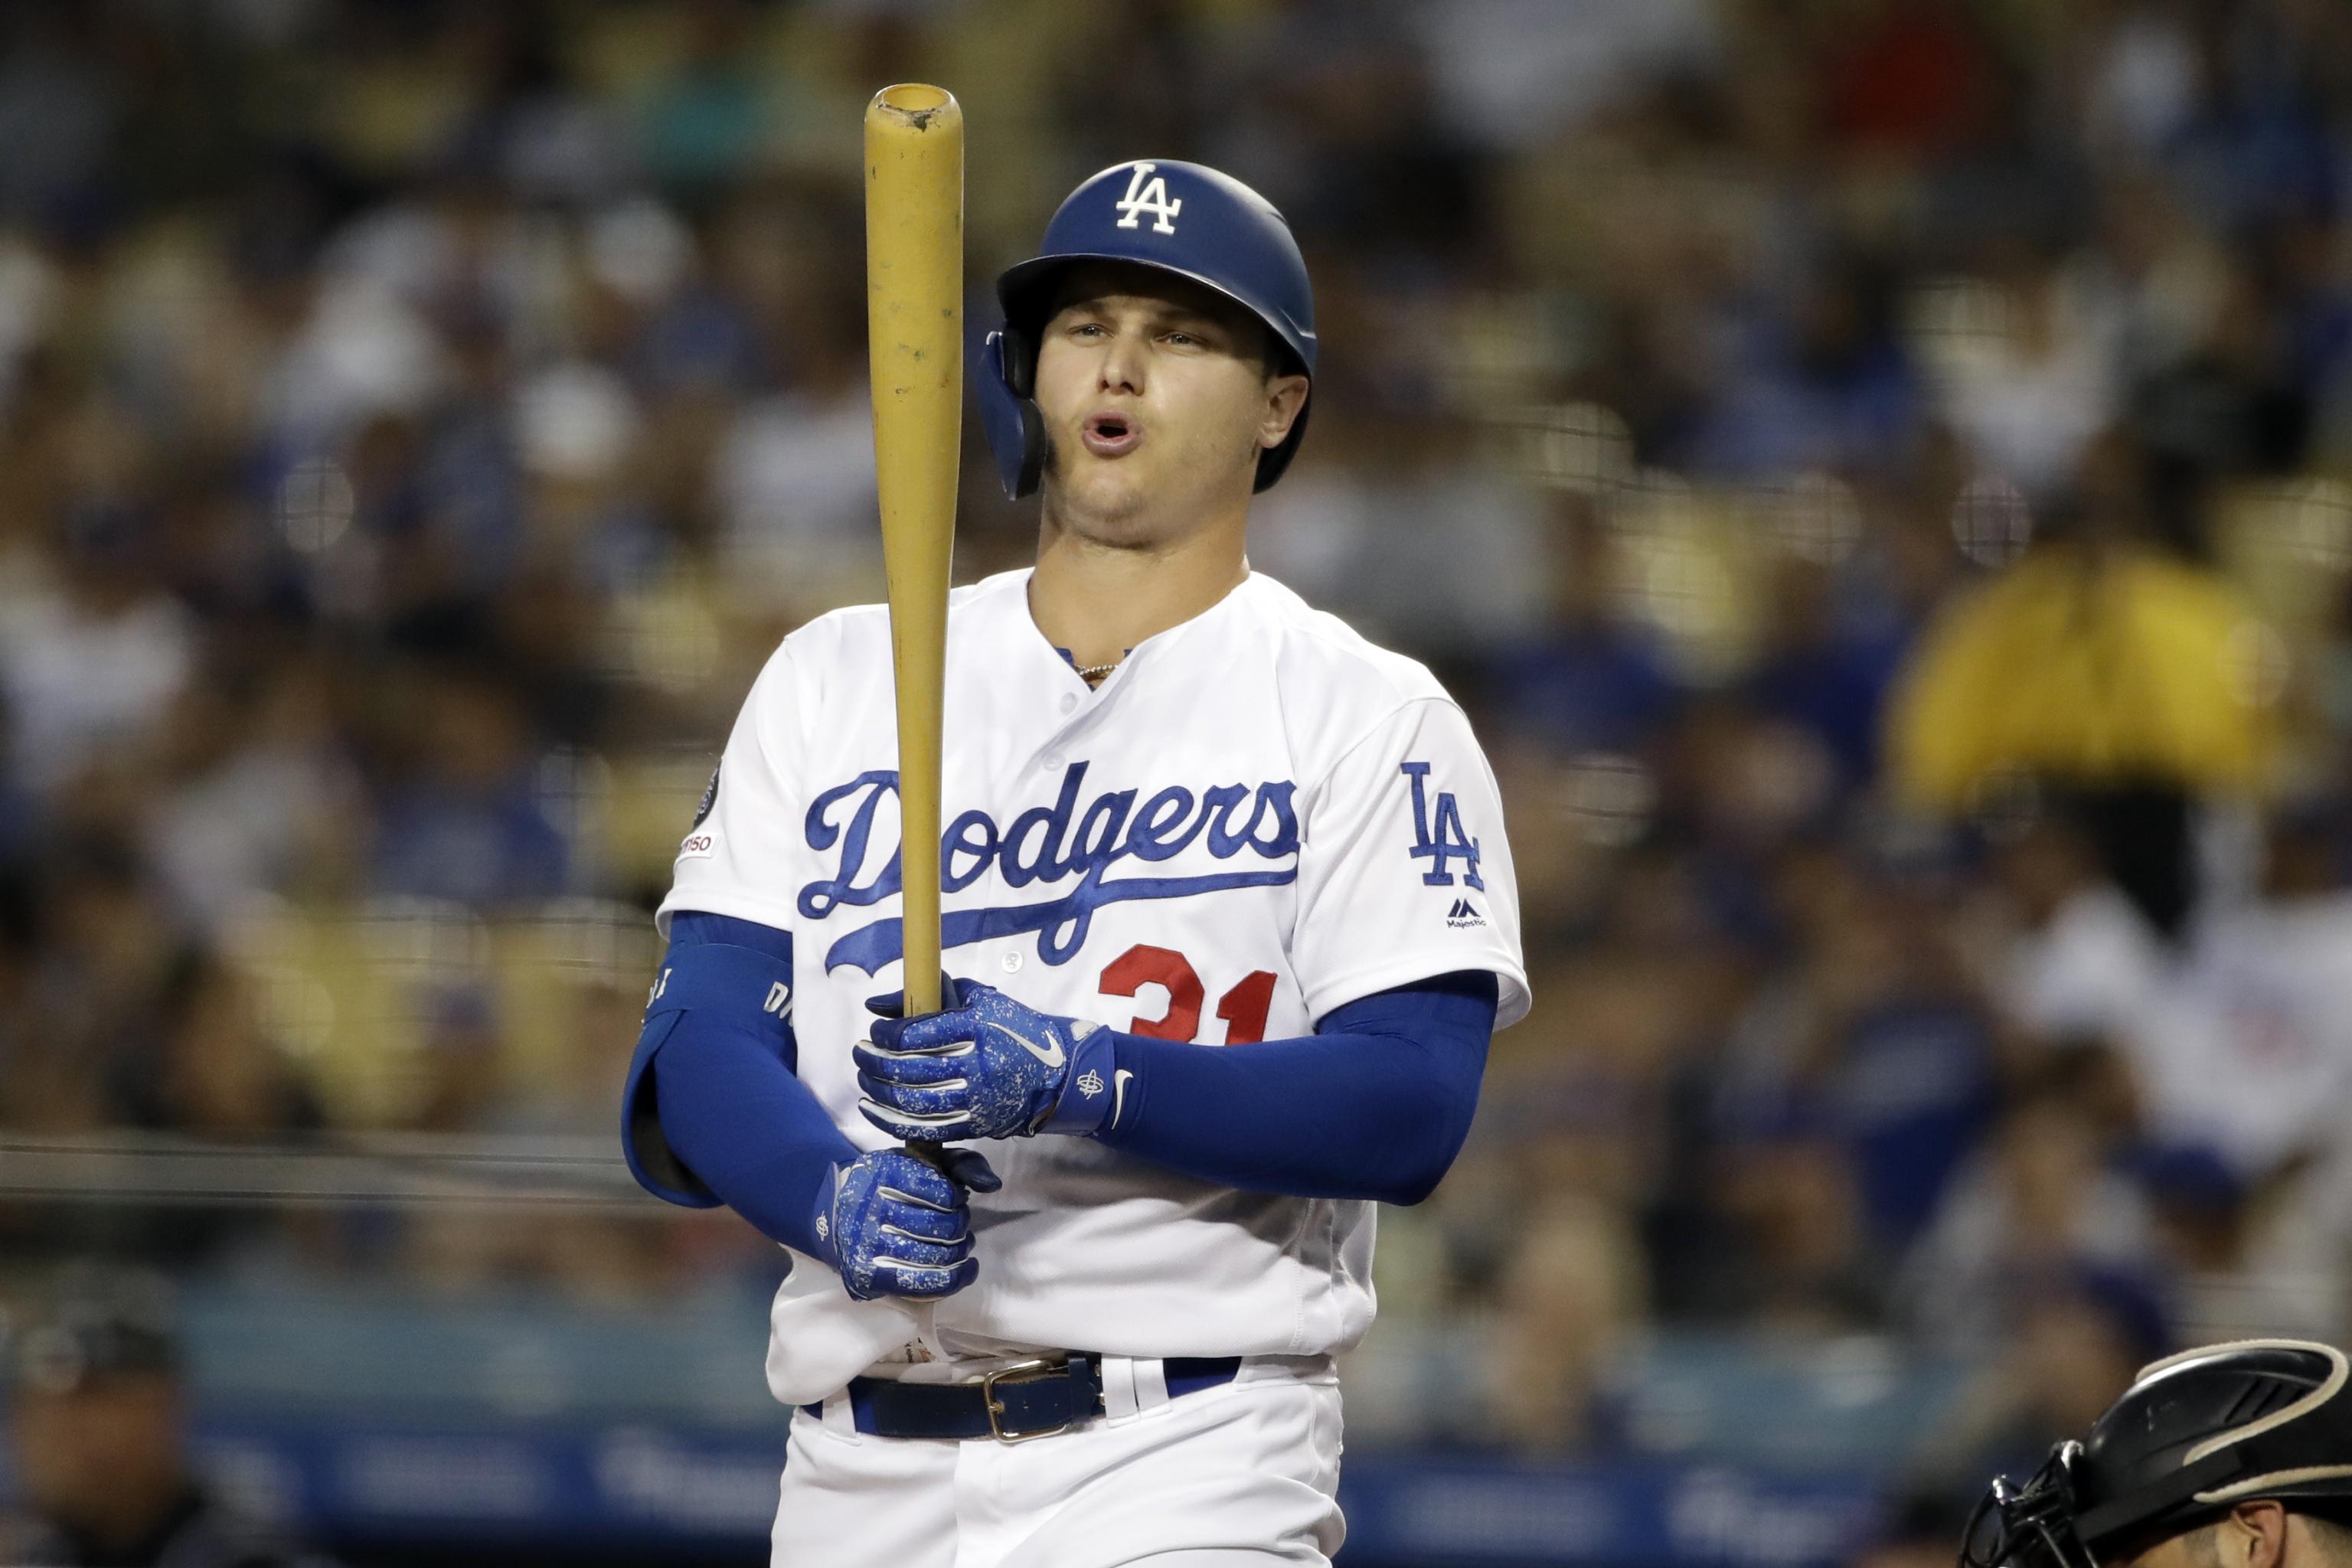 Joc Pederson, Chicago Cubs OF, signs one-year, $7 million contract